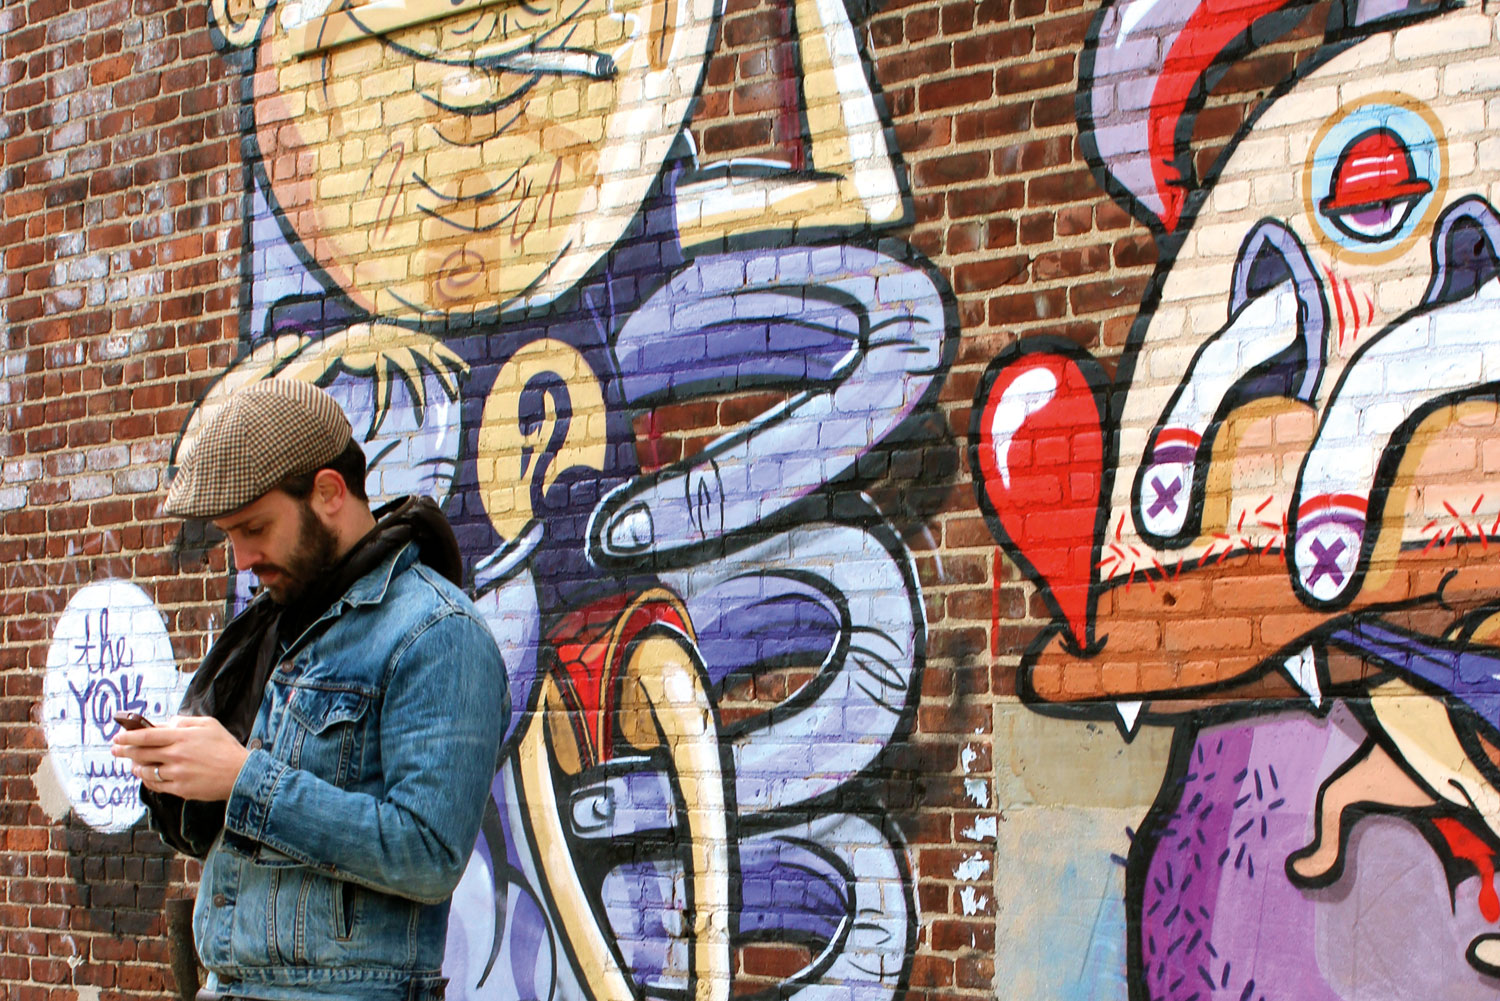 One of Brooklyn's many resident hipsters takes a break alongside some local street art.